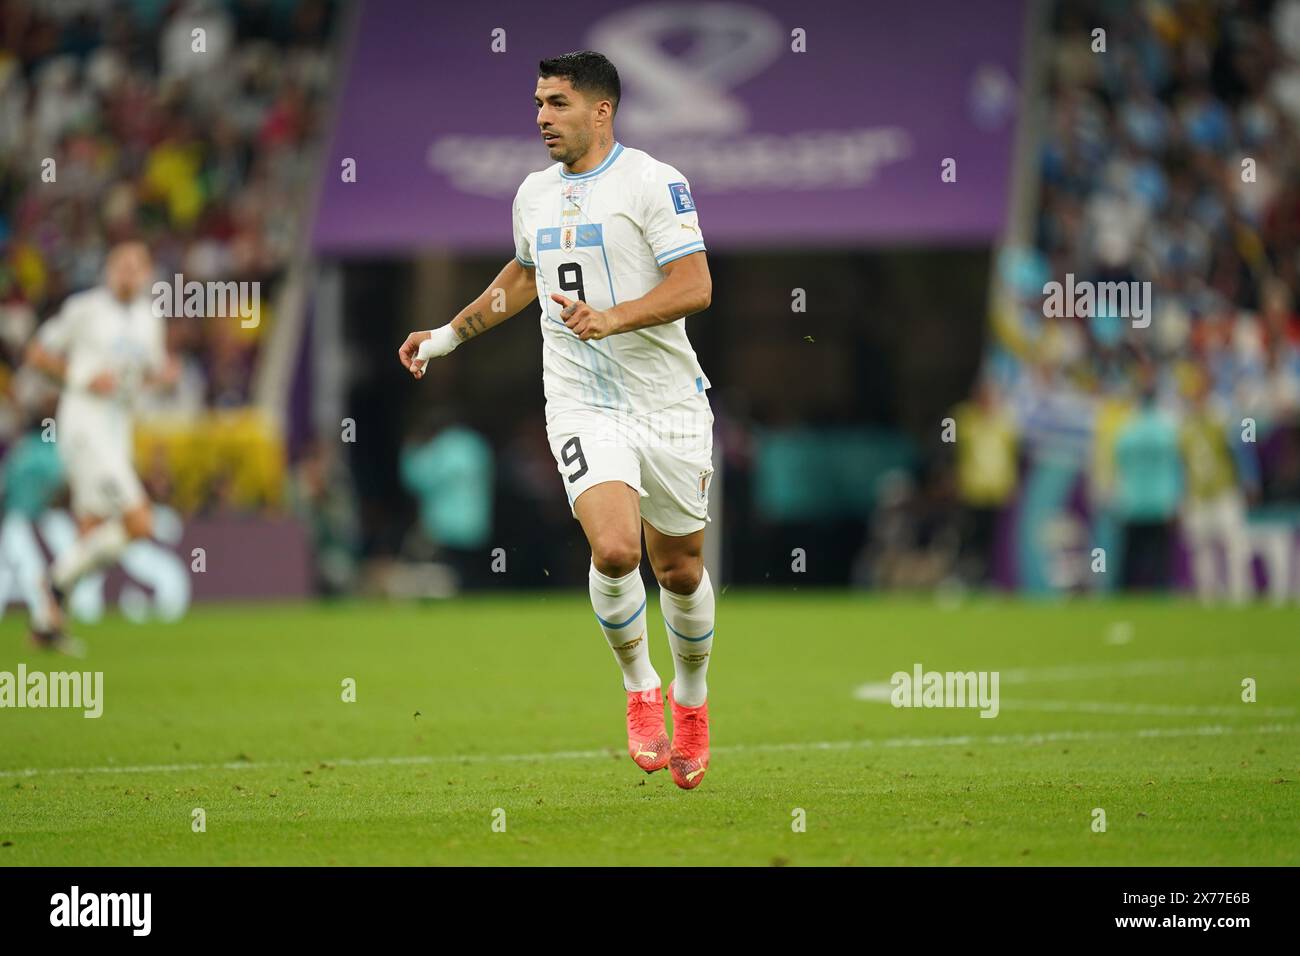 Lusail, Qatar. 28th November 2022. Luis Suarez in action during the match between Portugal vs. Uruguay, Group H, Fifa World Cup Qatar 2022. Stock Photo